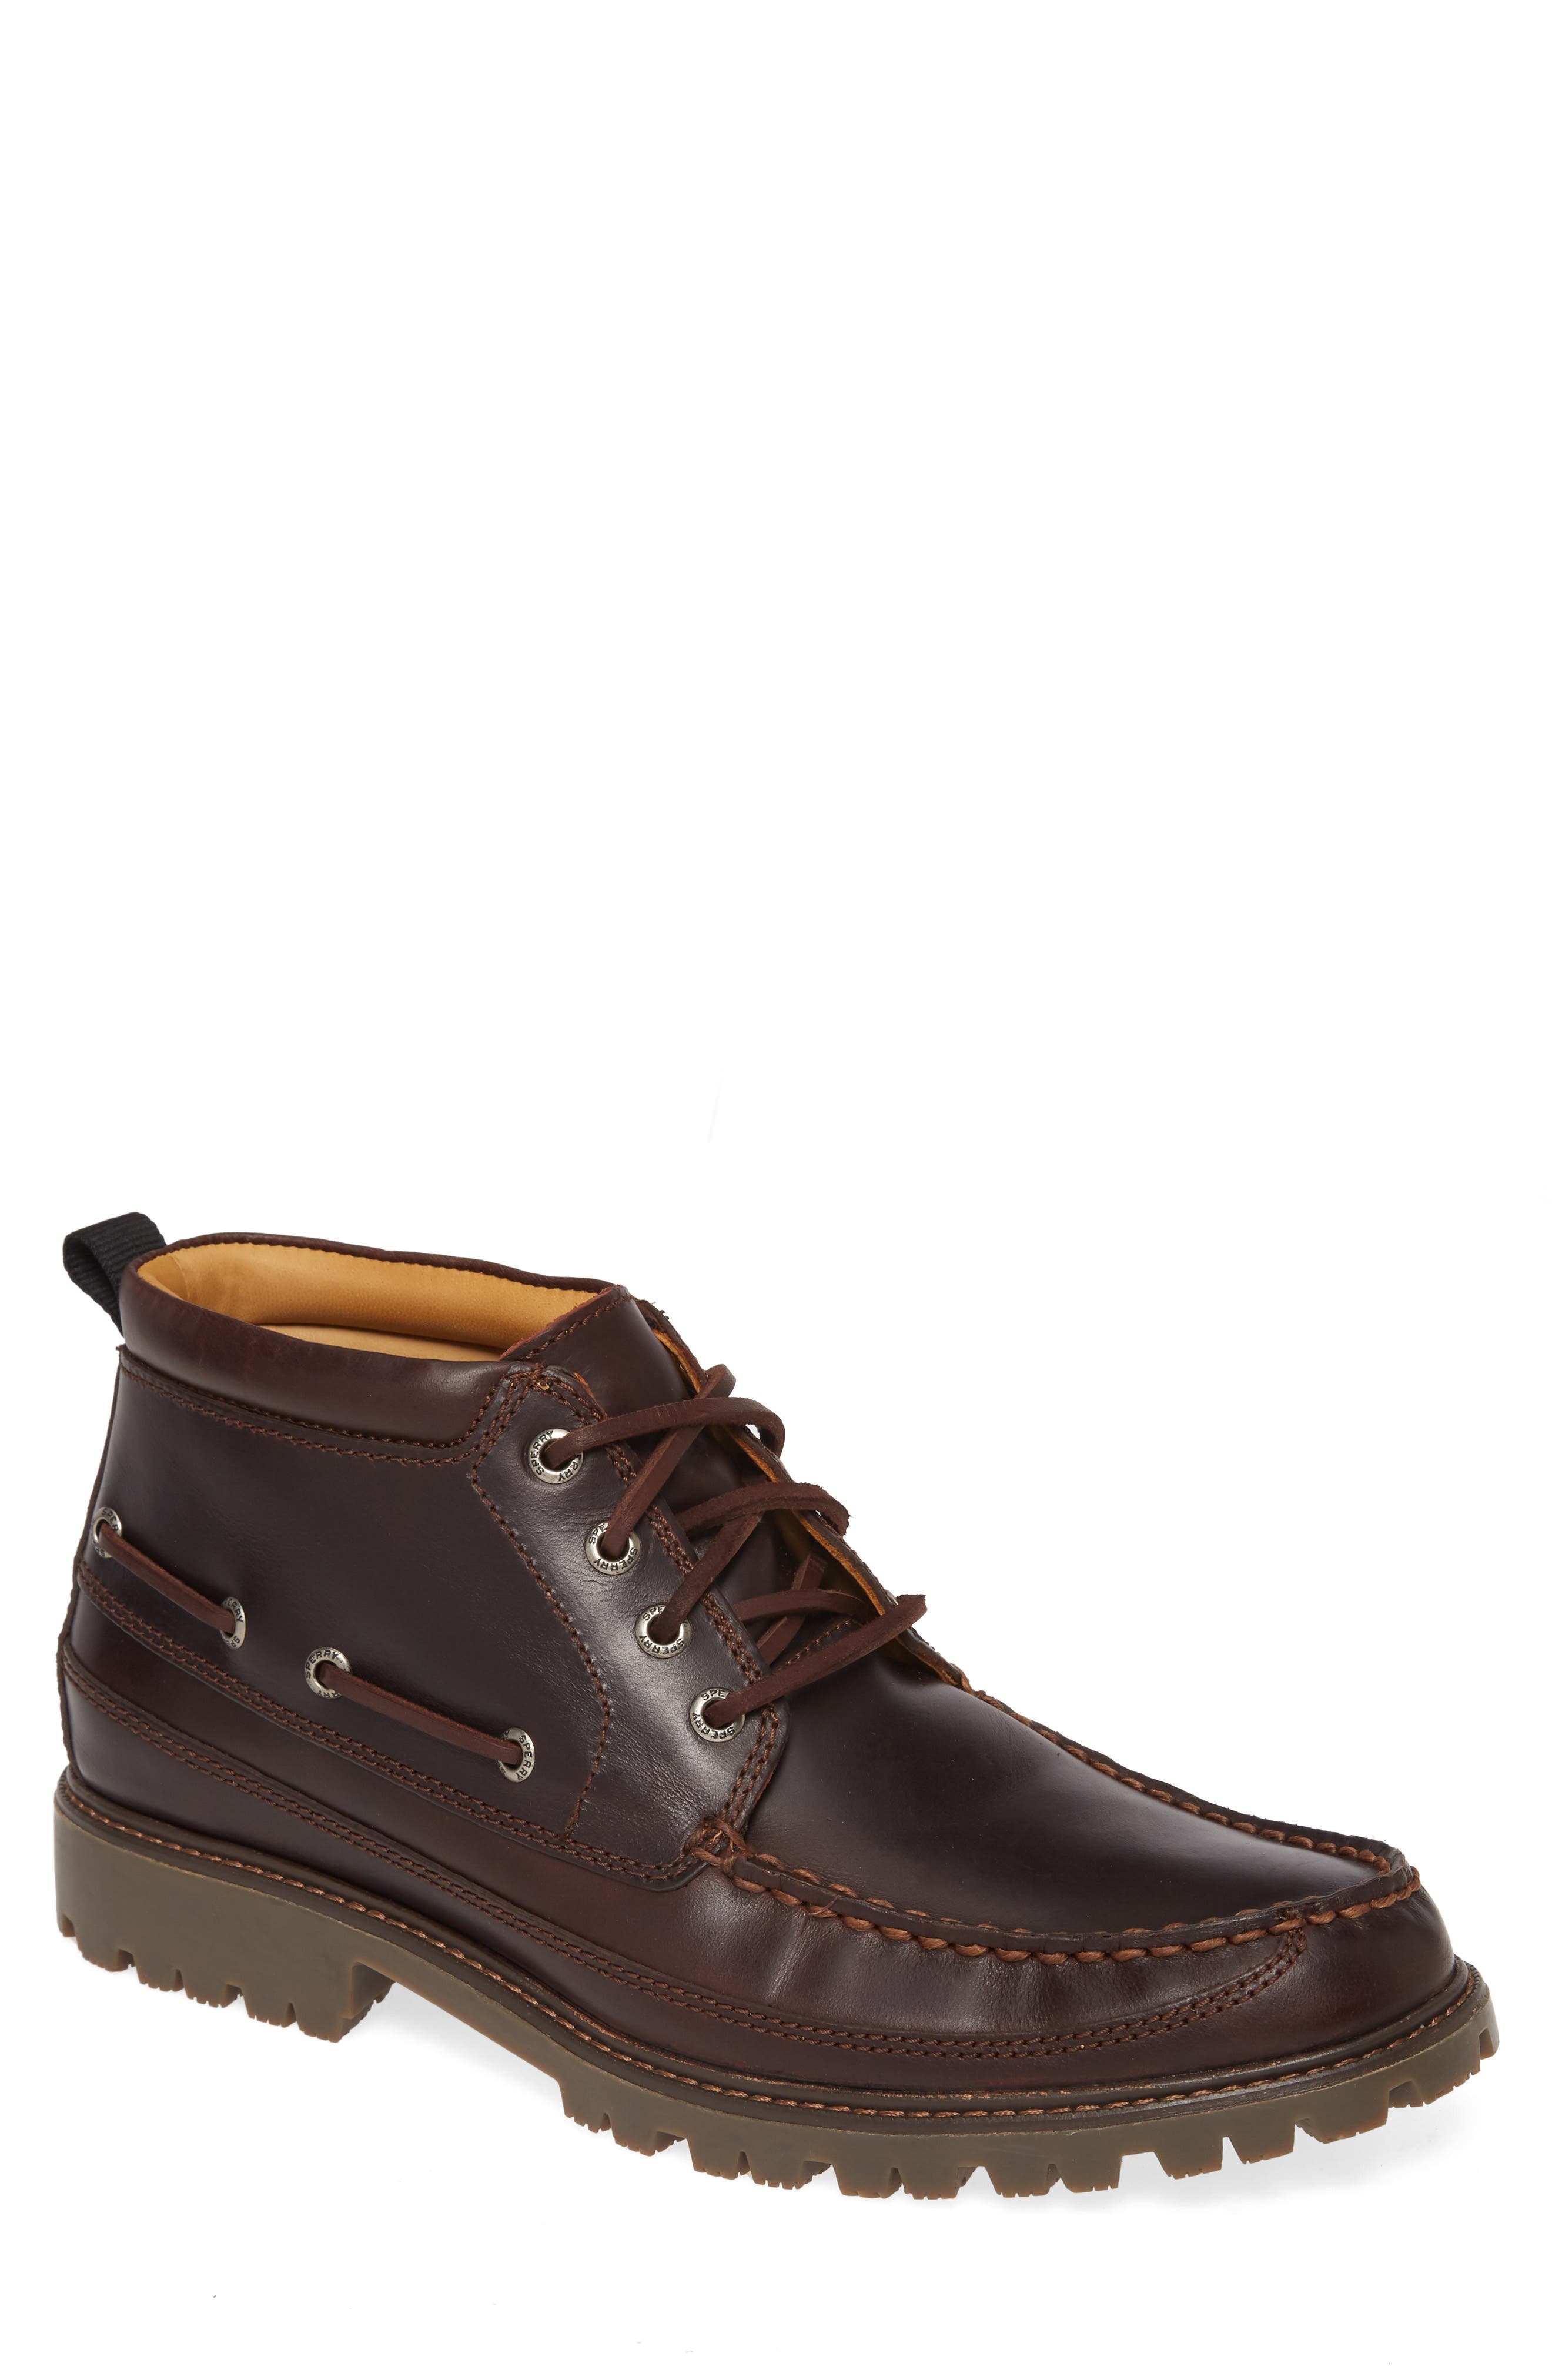 sperry moc toe boot